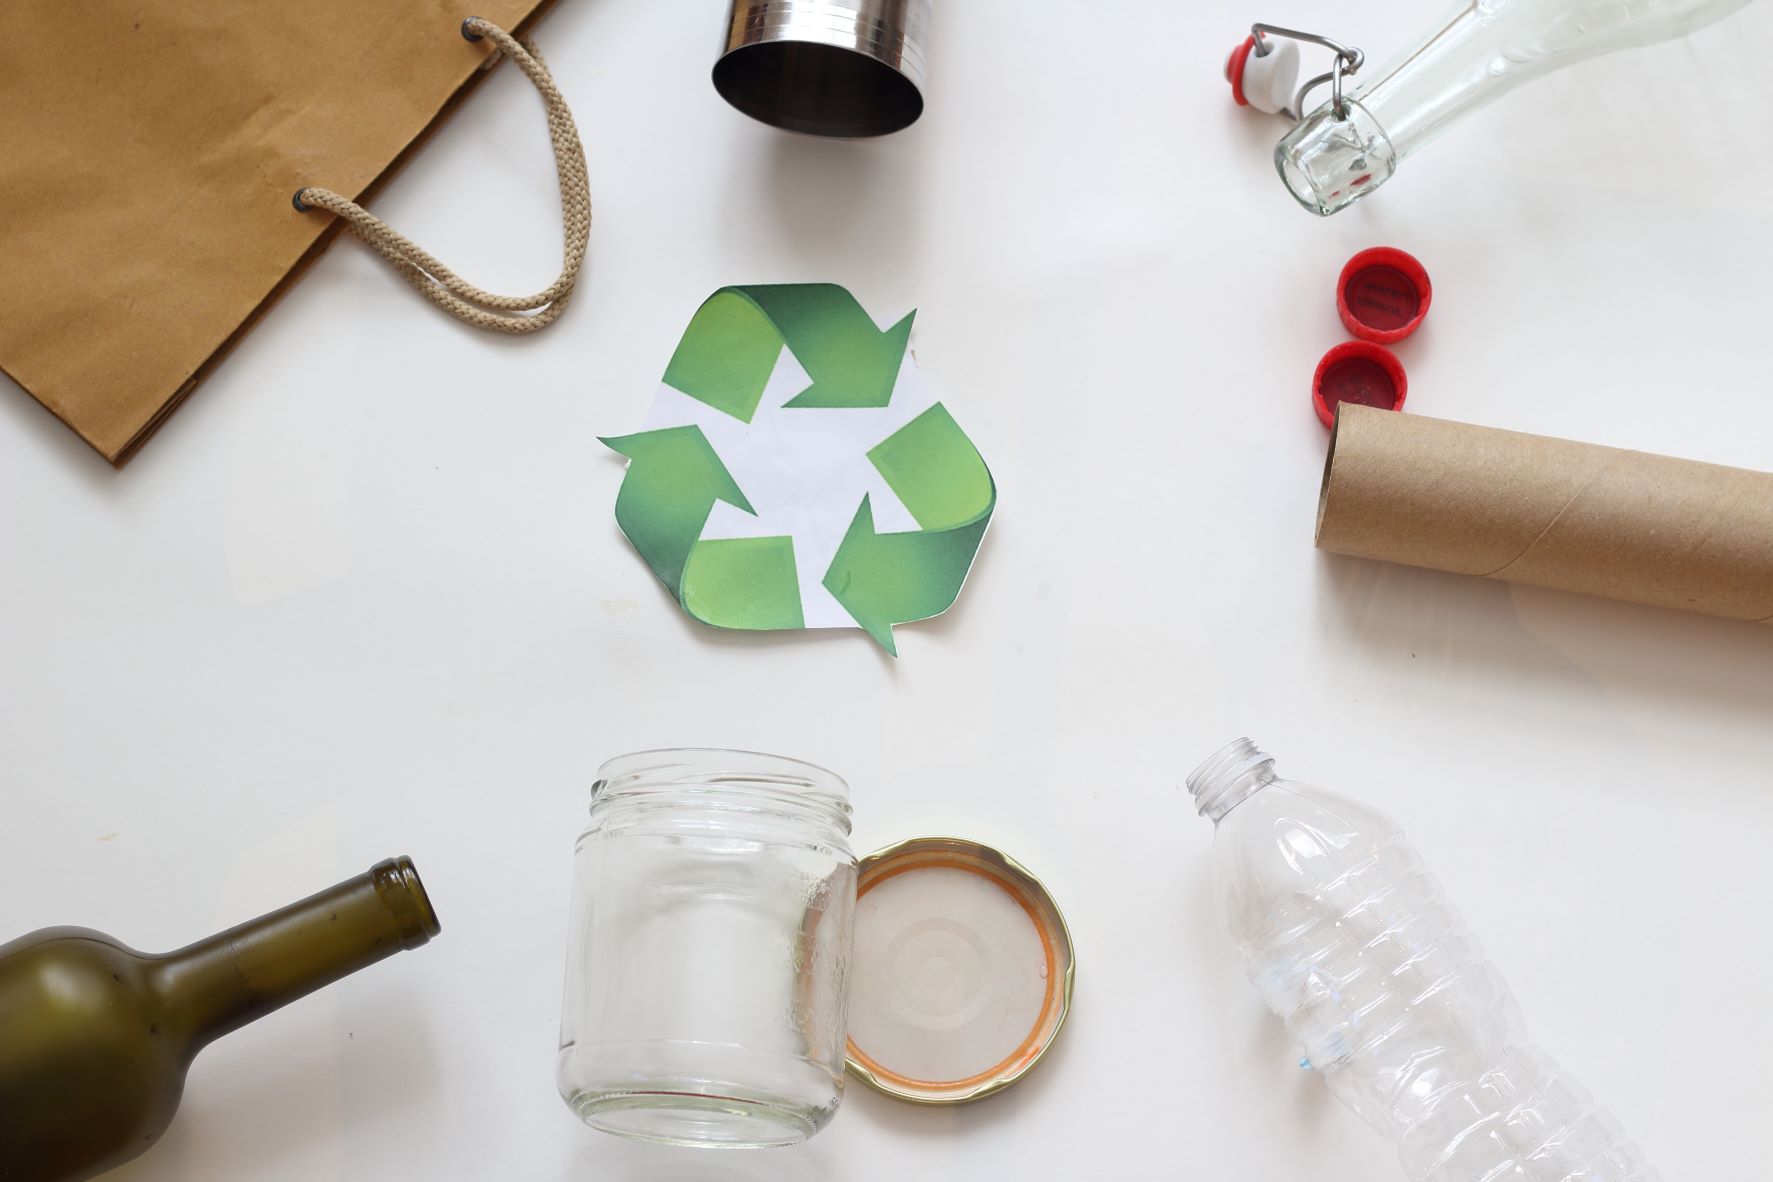 TIPS TO REDUCE WASTE AND RECYCLE RIGHT